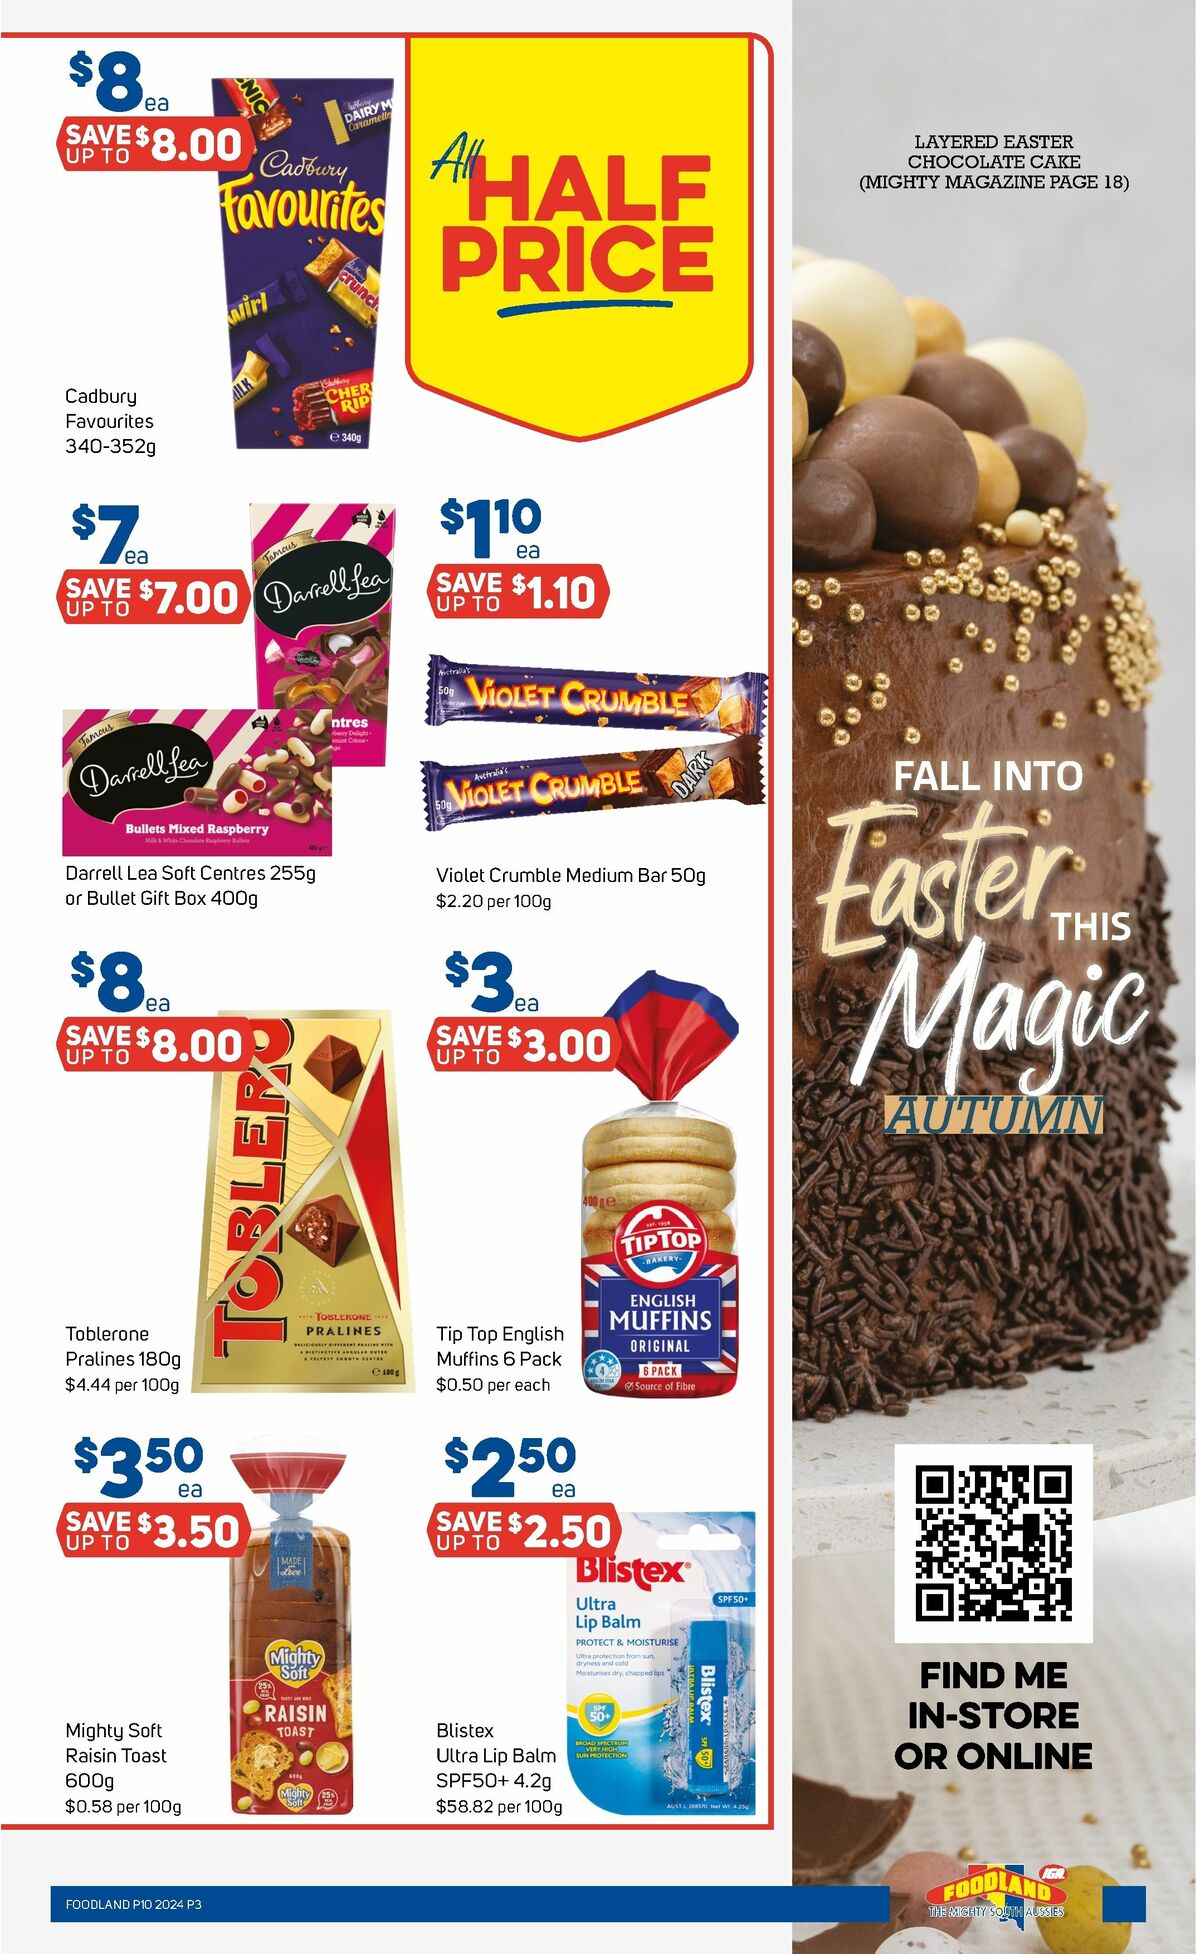 Foodland Catalogues from 6 March